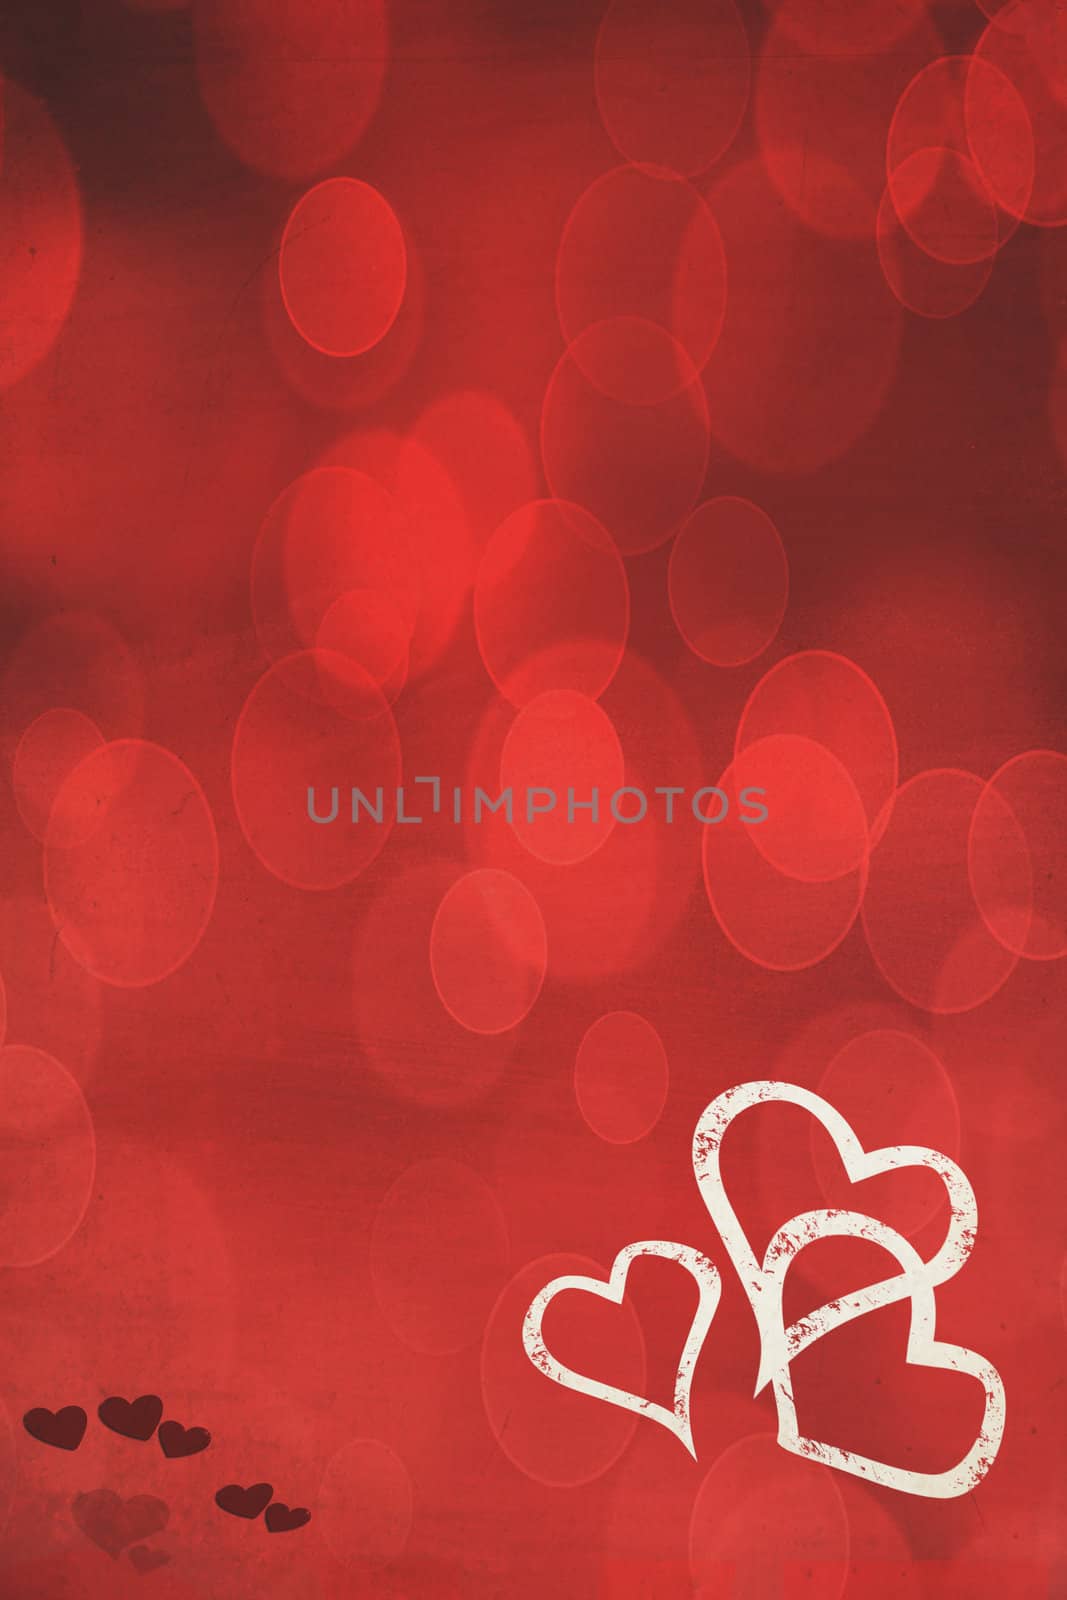 Photo based illustration of a red background with hearts. Copy space available.
